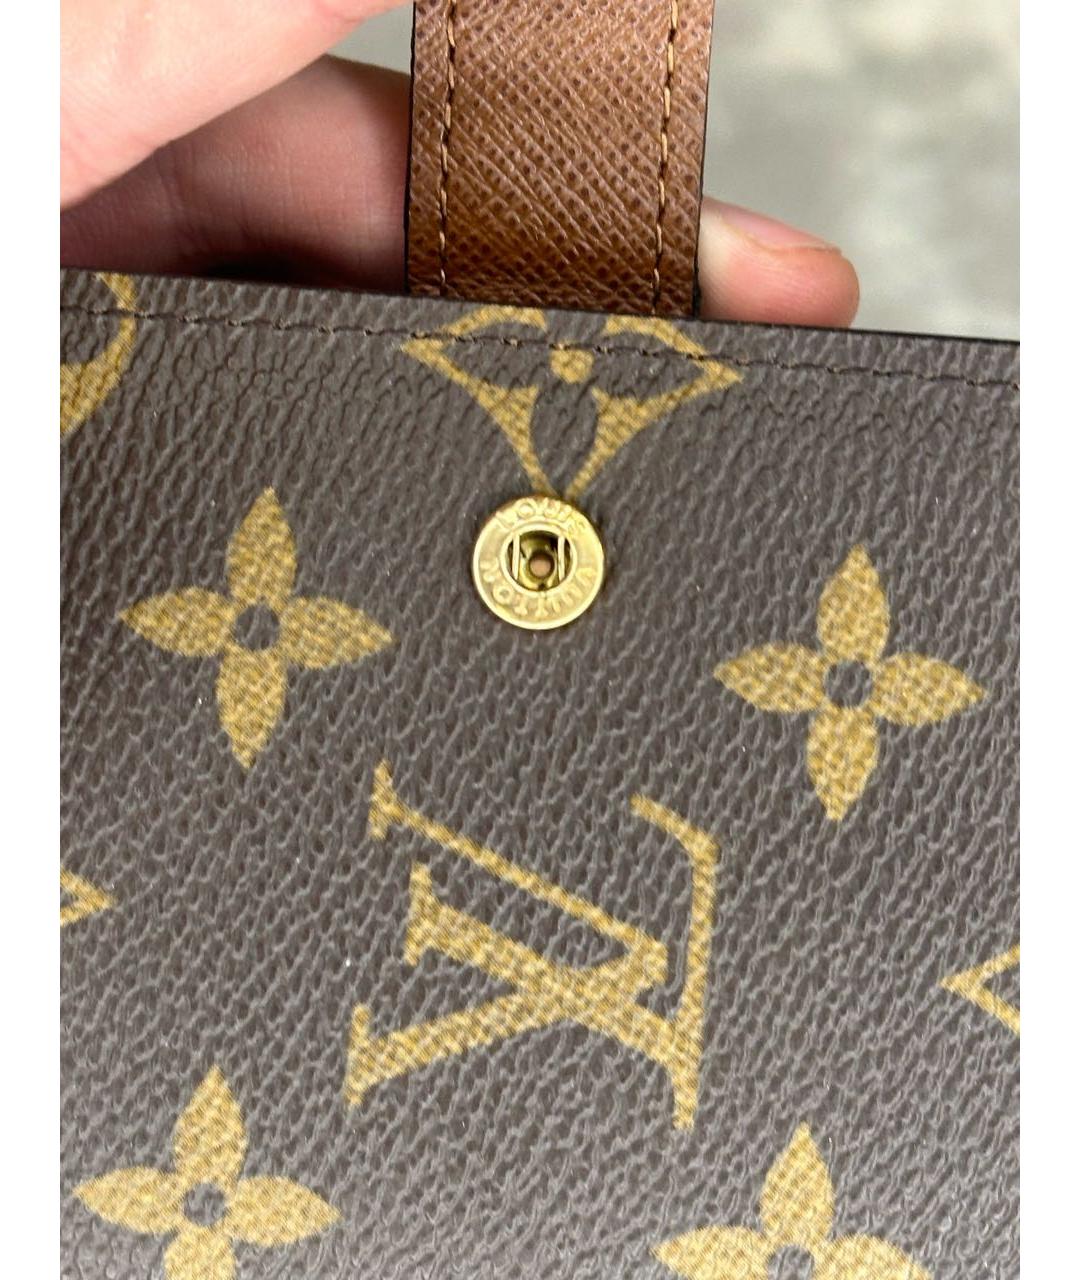 LOUIS VUITTON PRE-OWNED Книга, фото 4